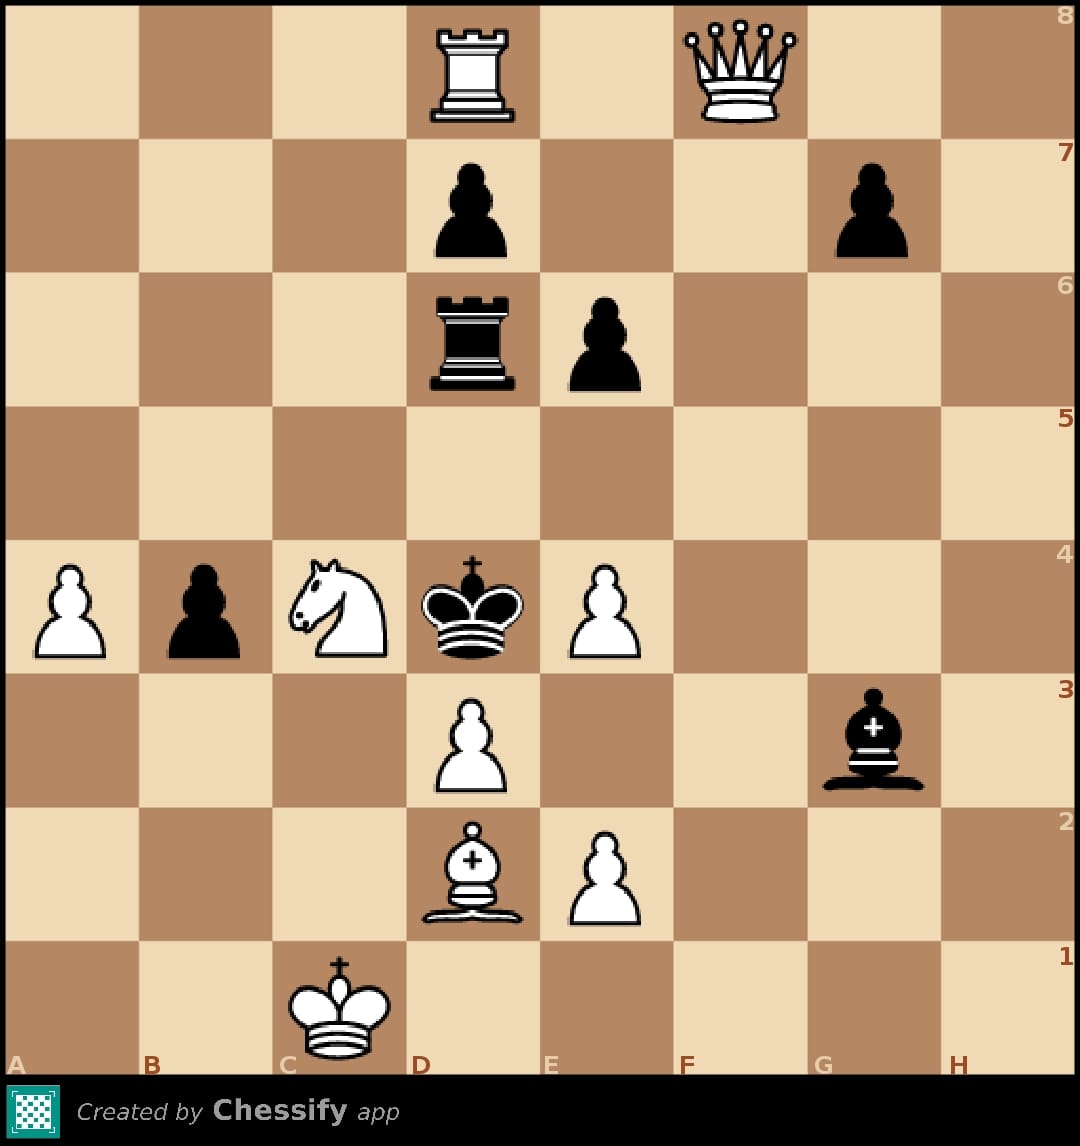 A chess puzzle. How to win in one move?